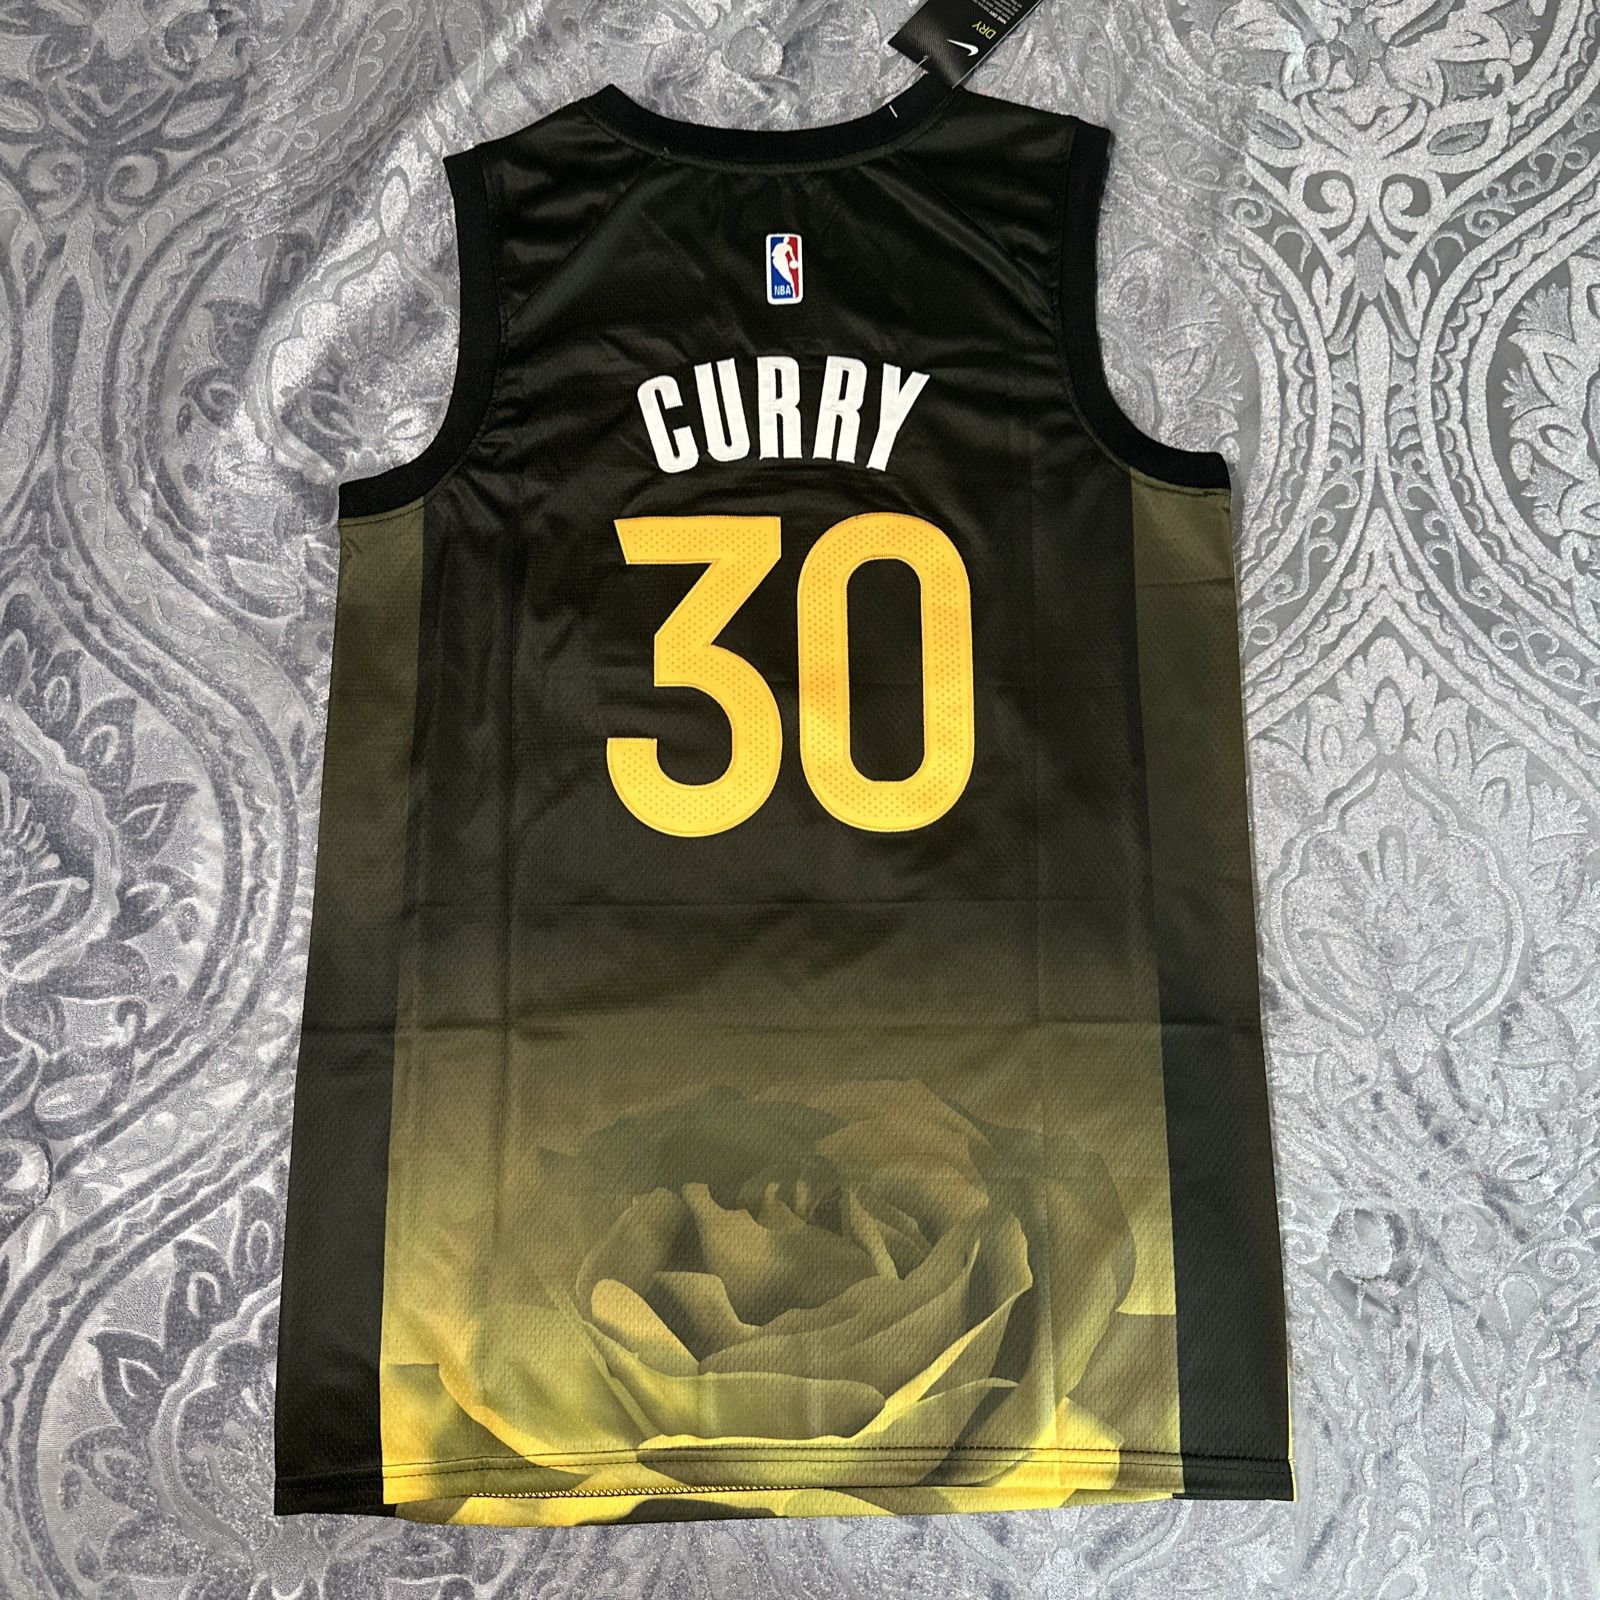 Nike Youth Golden State Warriors Stephen Curry Jersey Size M Youth for Sale  in San Bernardino, CA - OfferUp